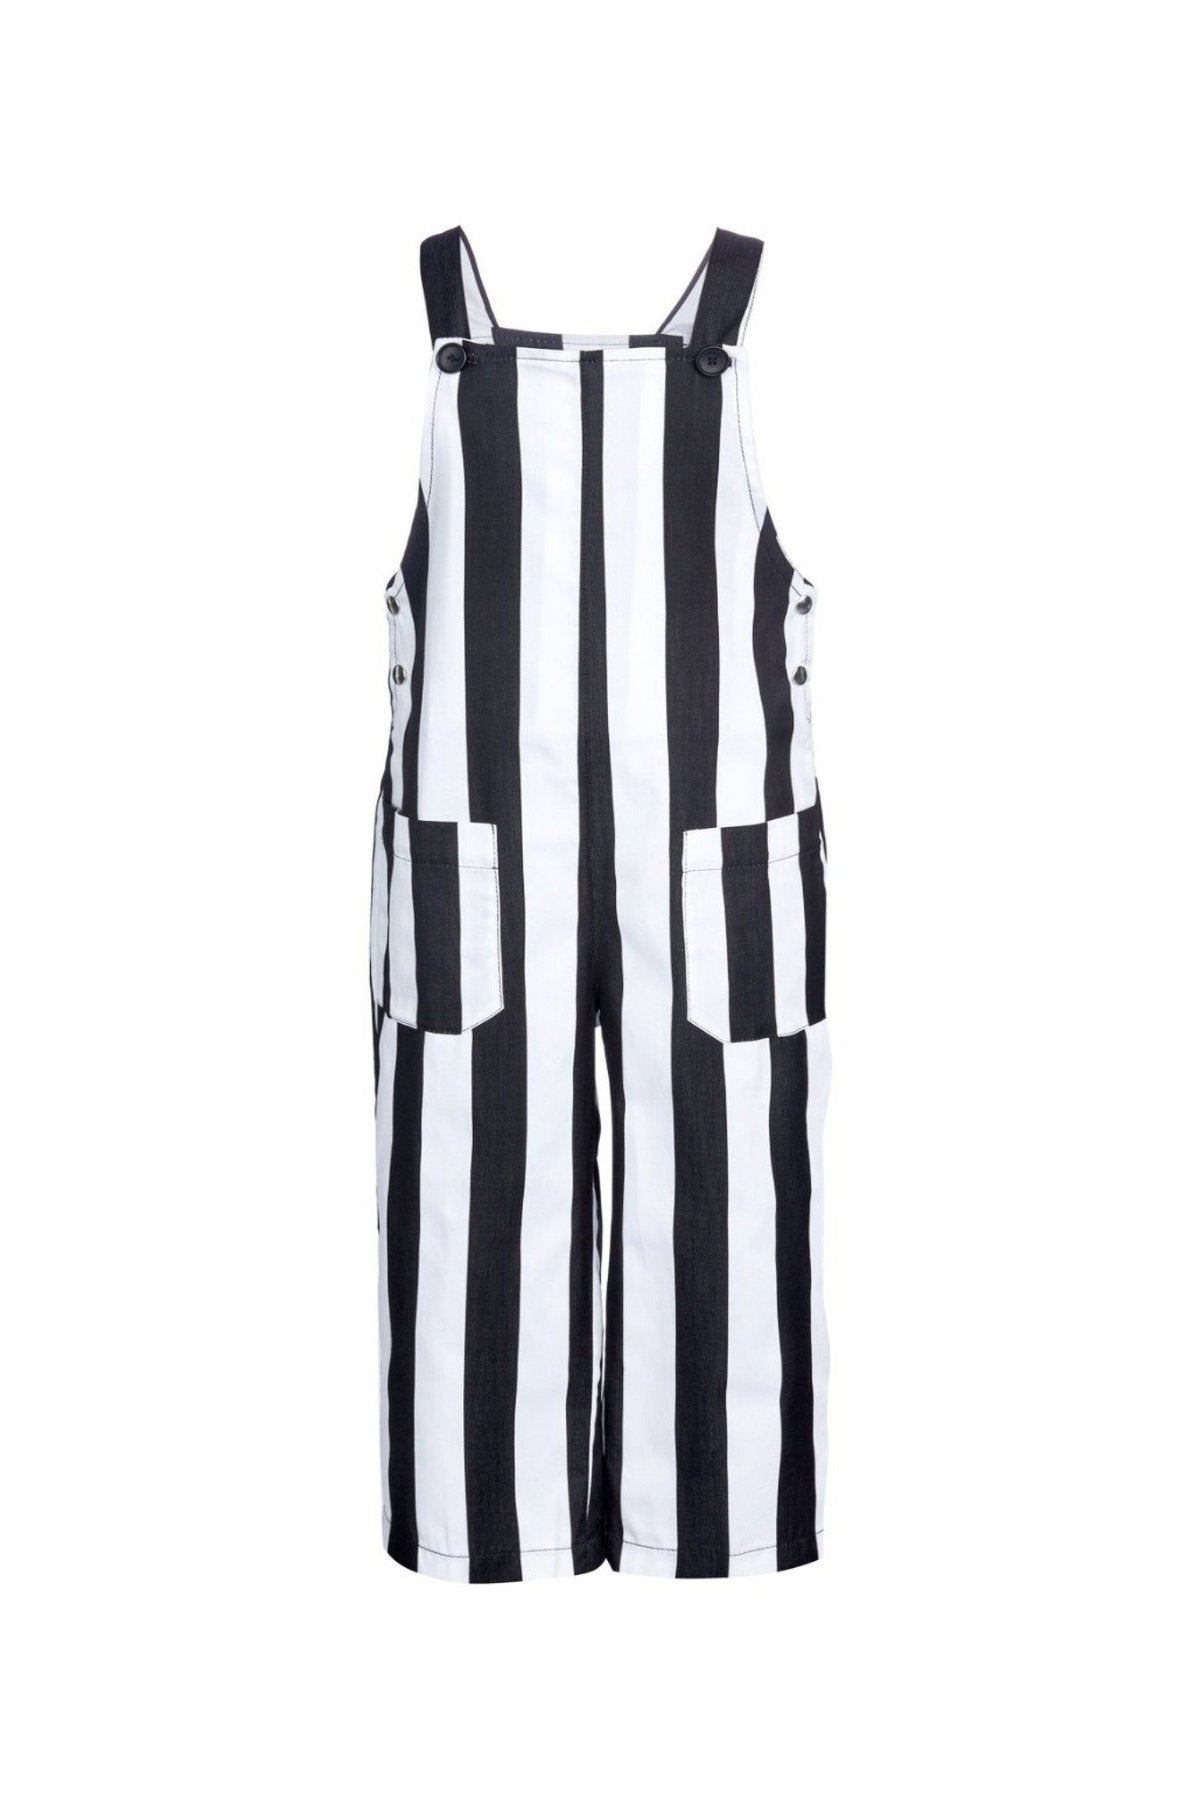 M'A KIDS JUMPSUIT IN BLACK AND WHITE STRIPES